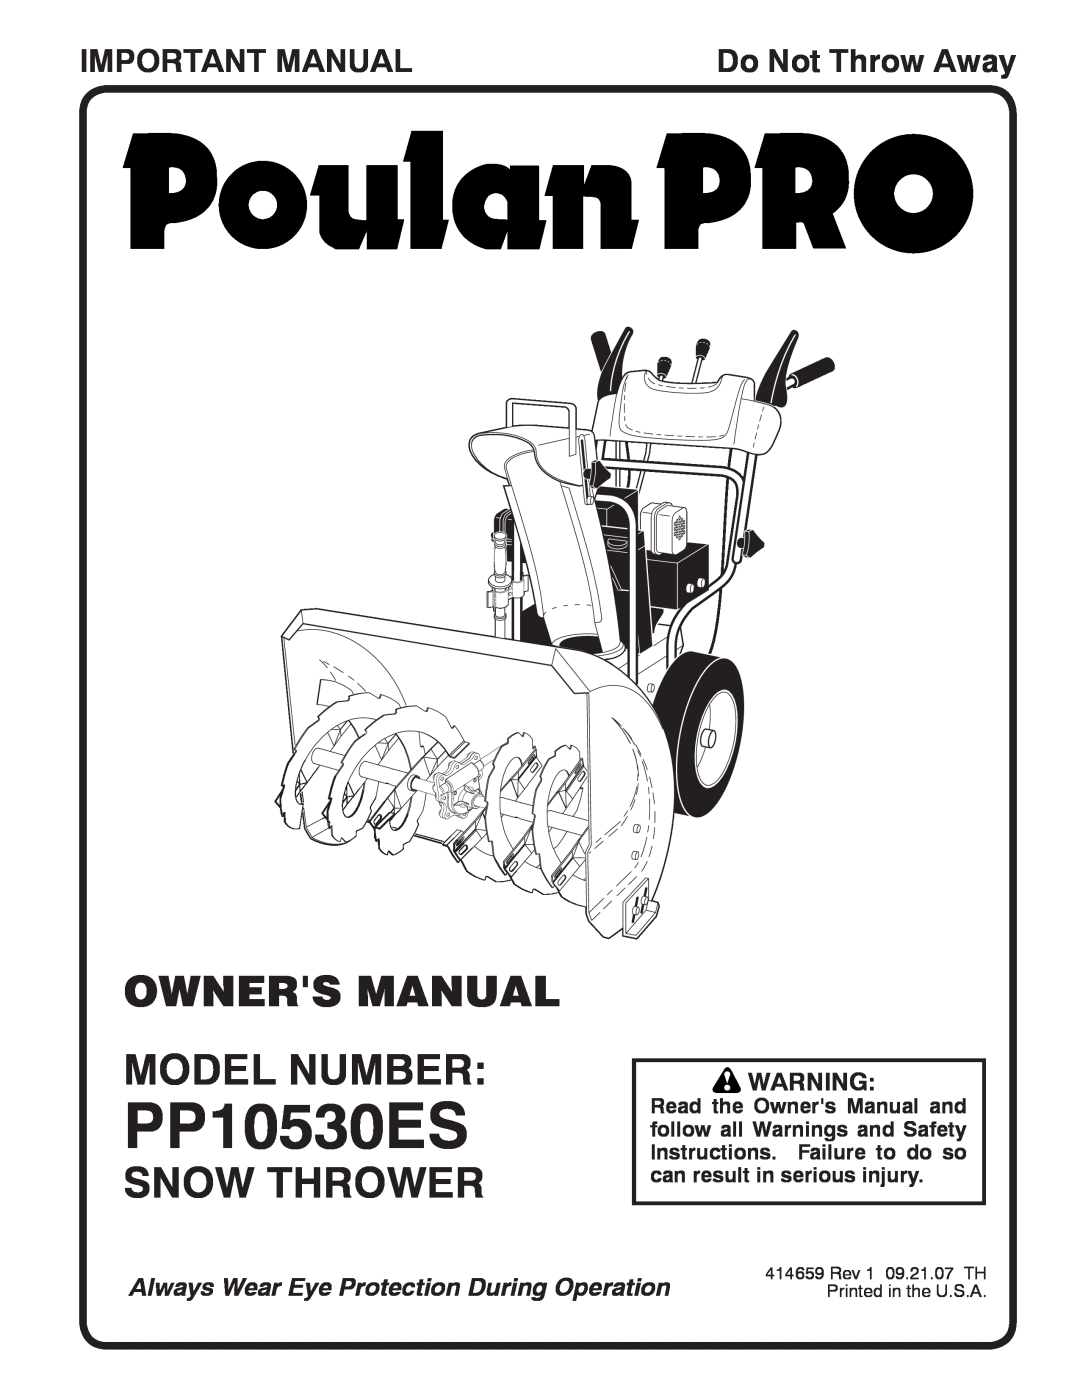 Poulan 96192001800 owner manual Snow Thrower, Important Manual, PP10530ES, Do Not Throw Away 